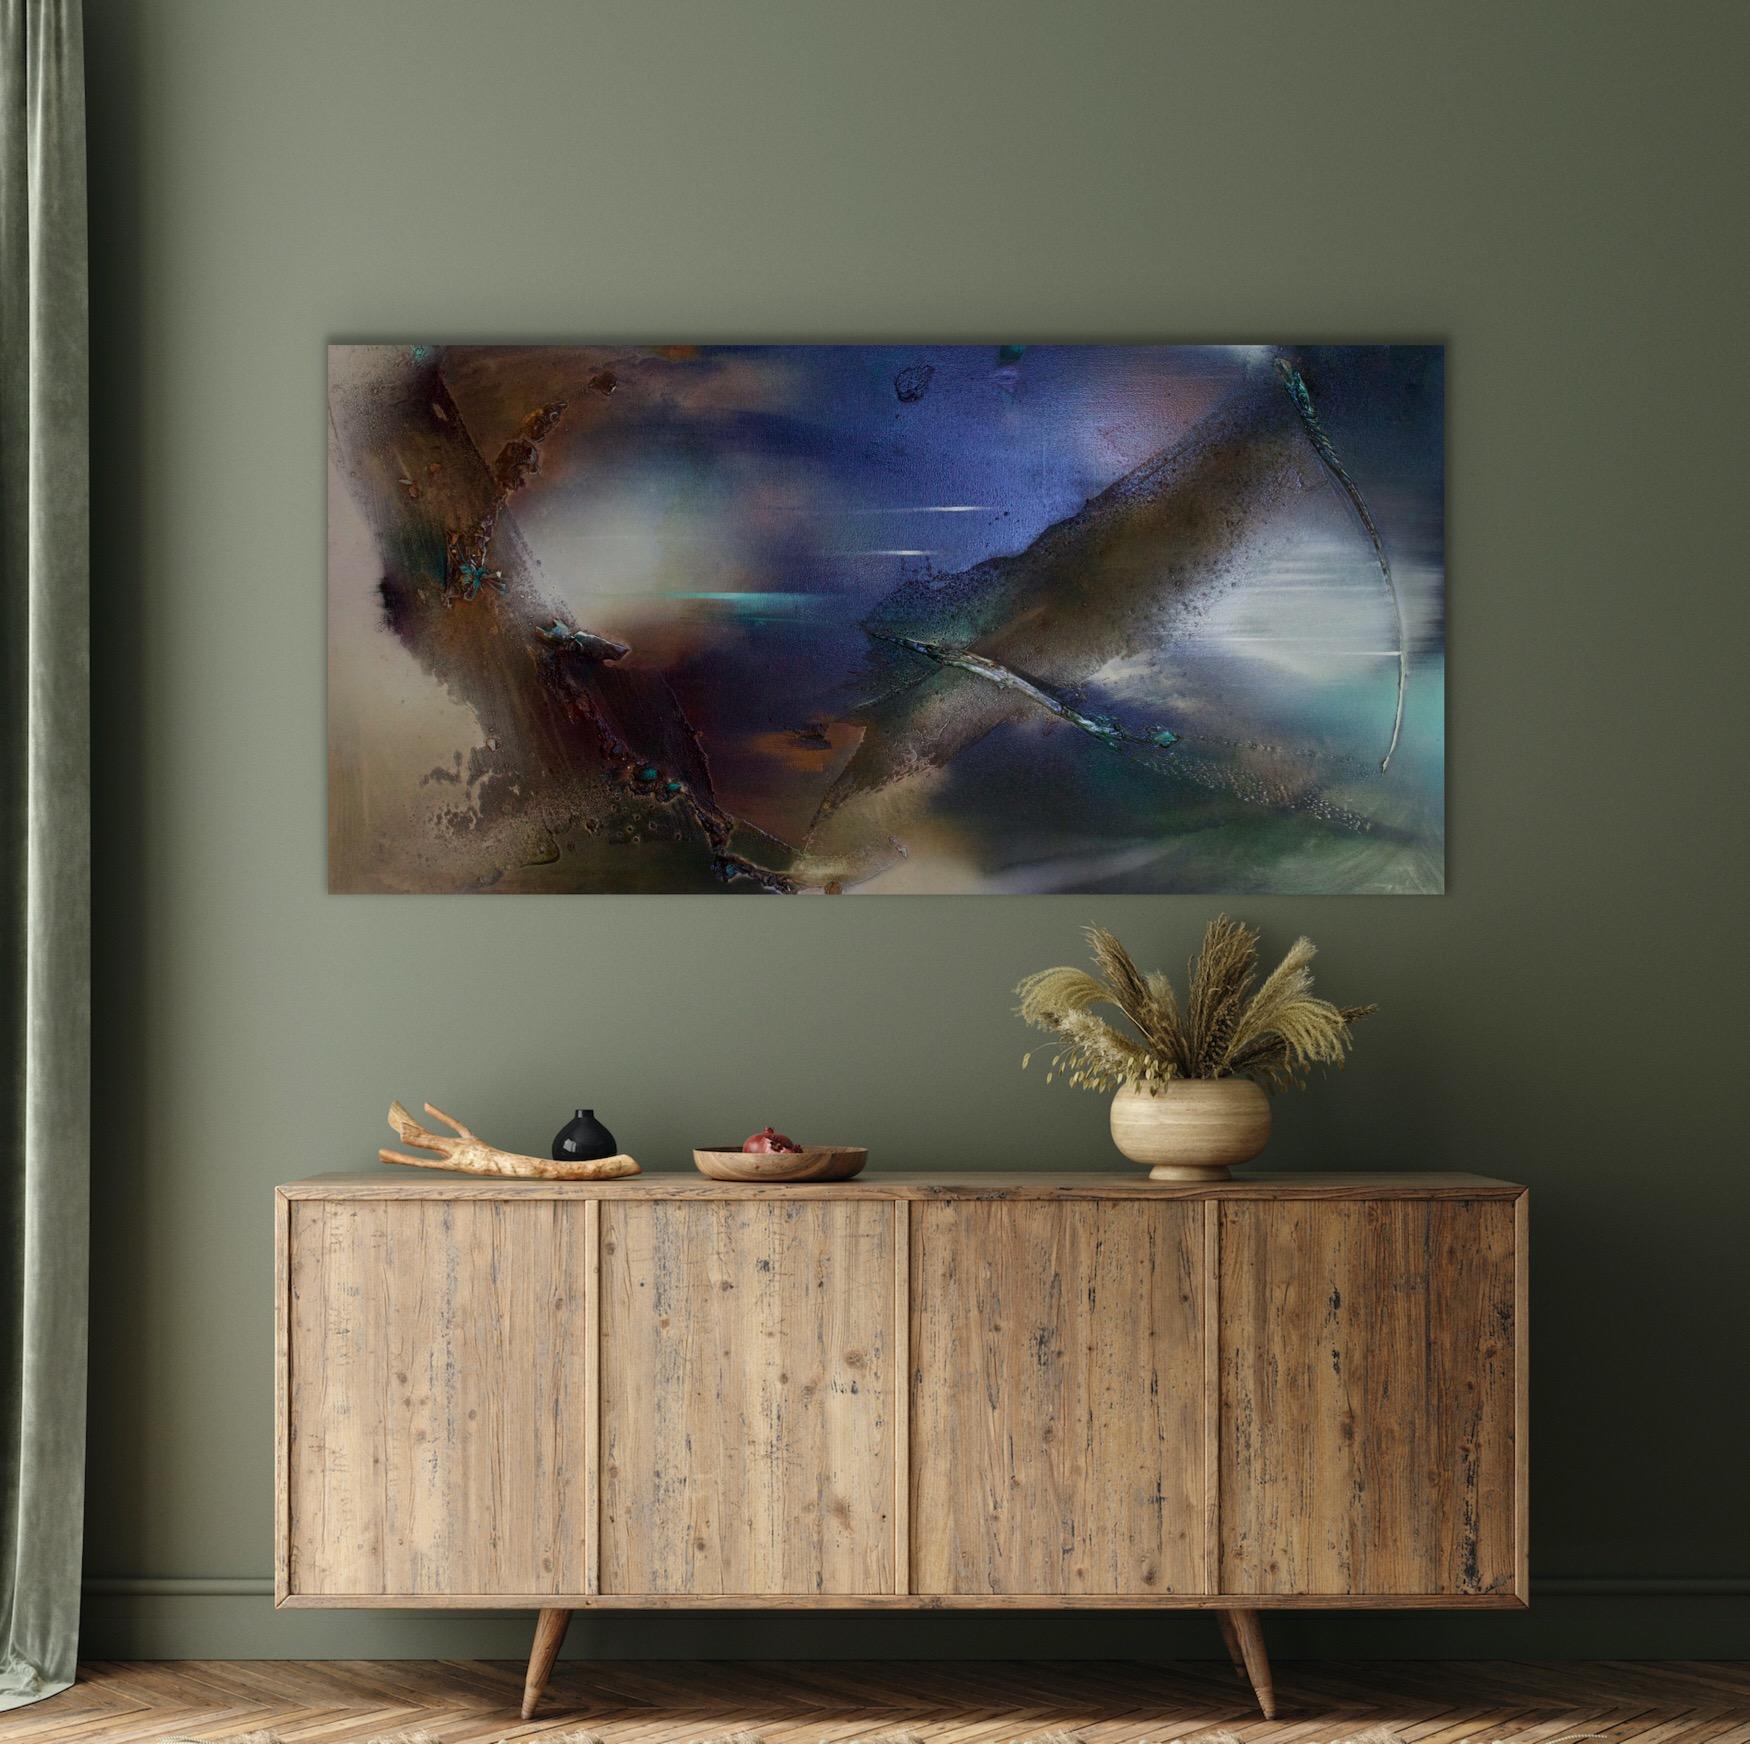 Rift Valley, Sonde 5  (romanticism tonal nature organic copper abstract texture) - Romantic Painting by Melisa Taylor Metzger